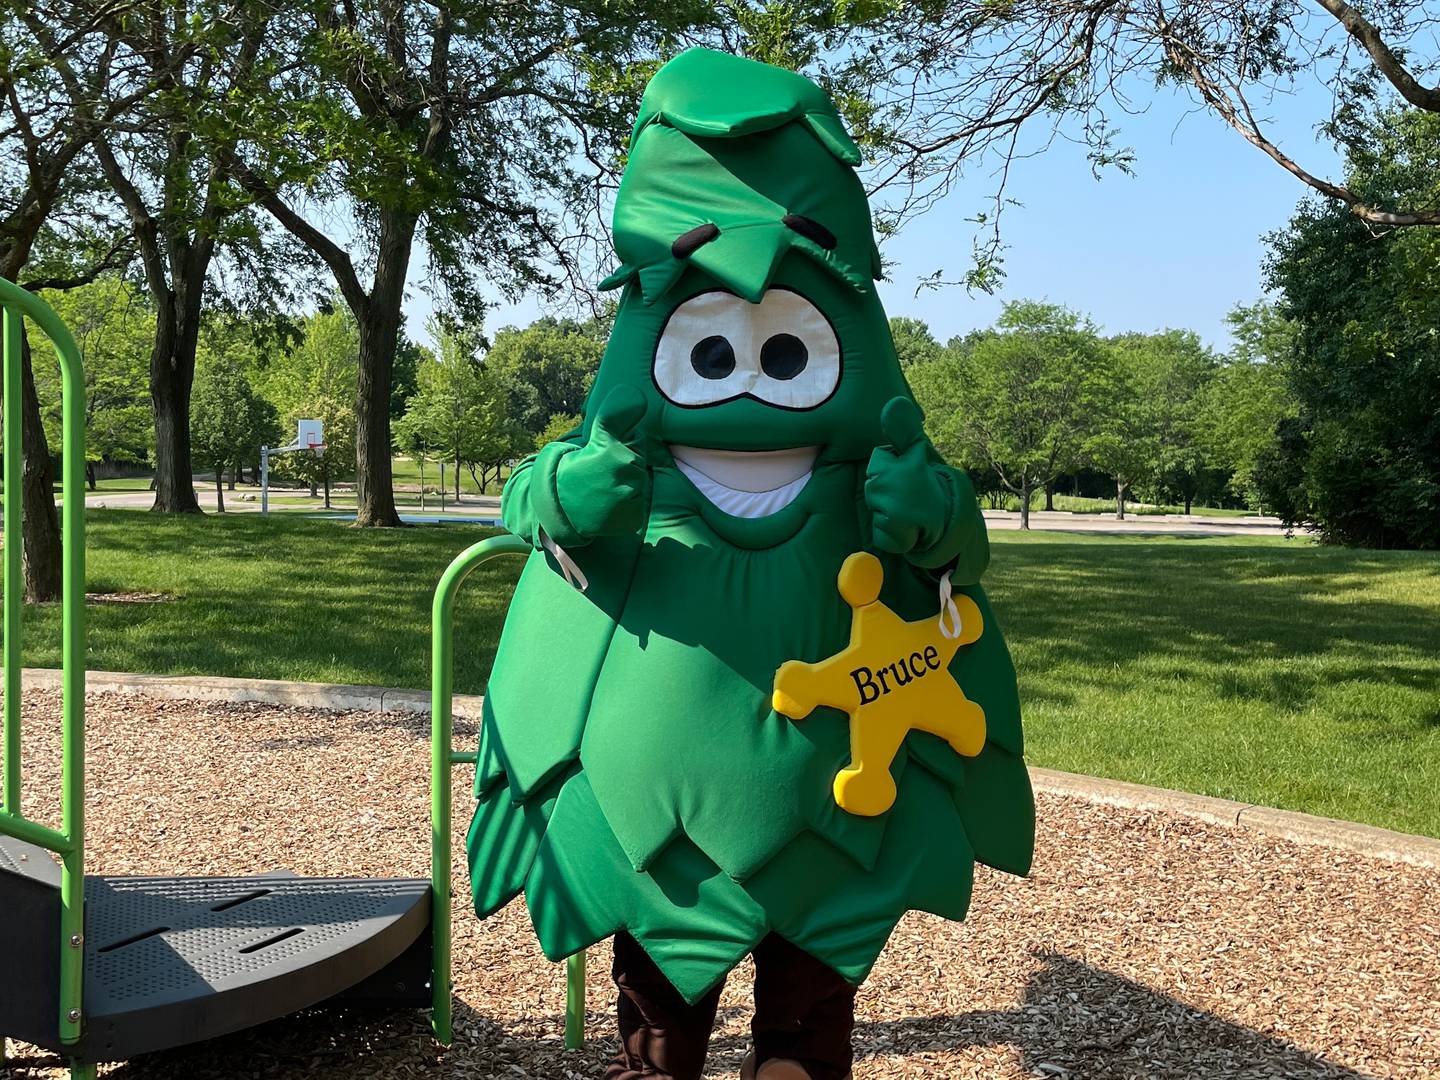 Batavia Park District's mascot, Bruce the Spruce, will be part of several National Parks and Recreation Month activities in Batavia, such as the Bruce the Spruce Scavenger Hunt and the park district's Popsicles in the Park event.